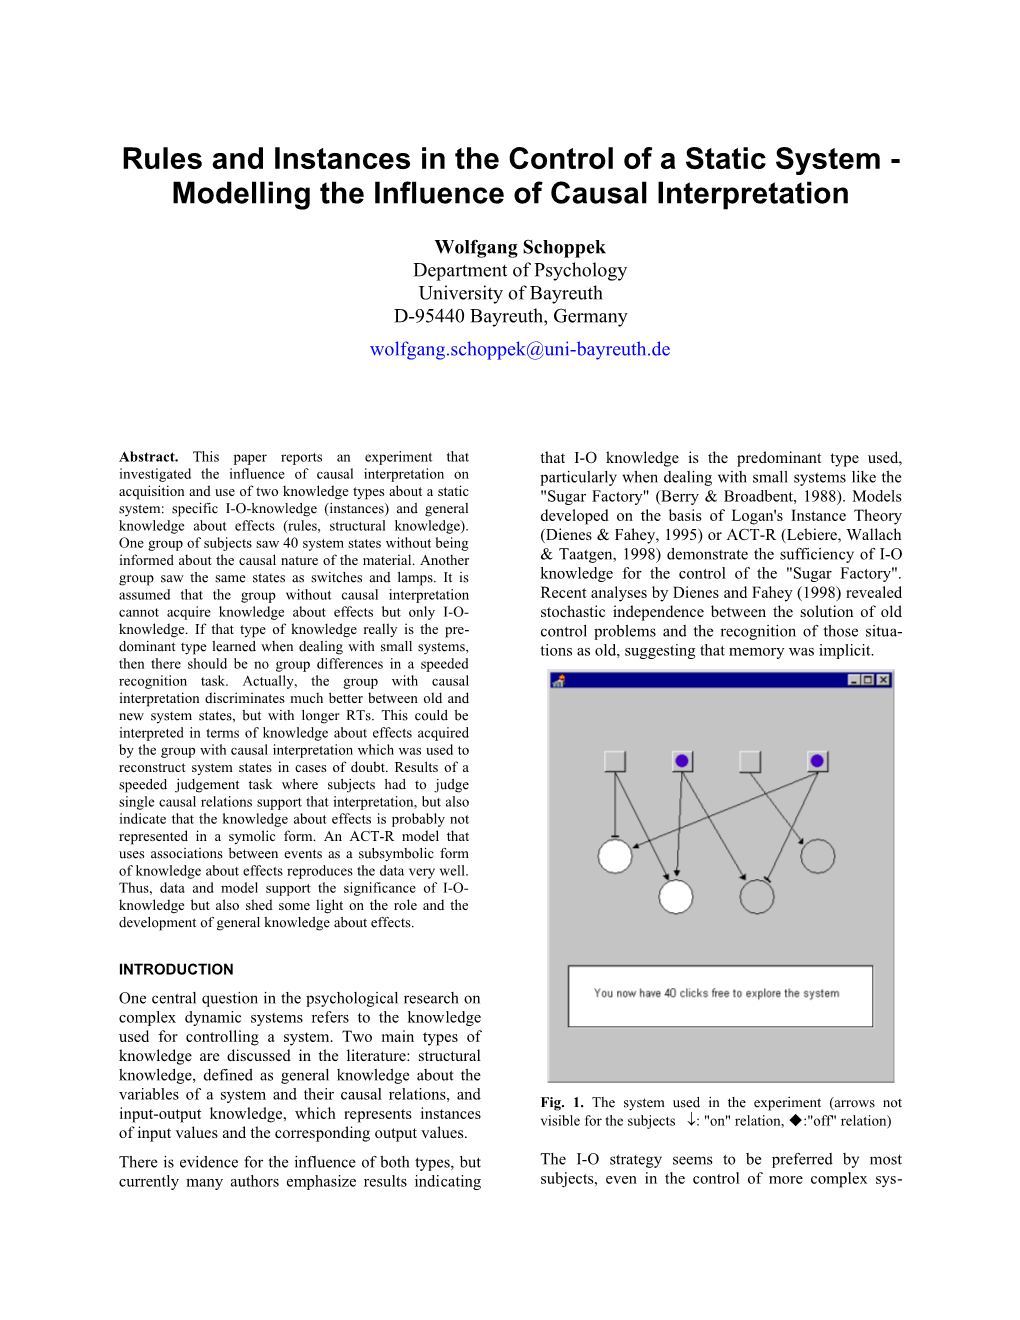 Rules and Instances in the Control of a Static System - Modelling the Influence of Causal